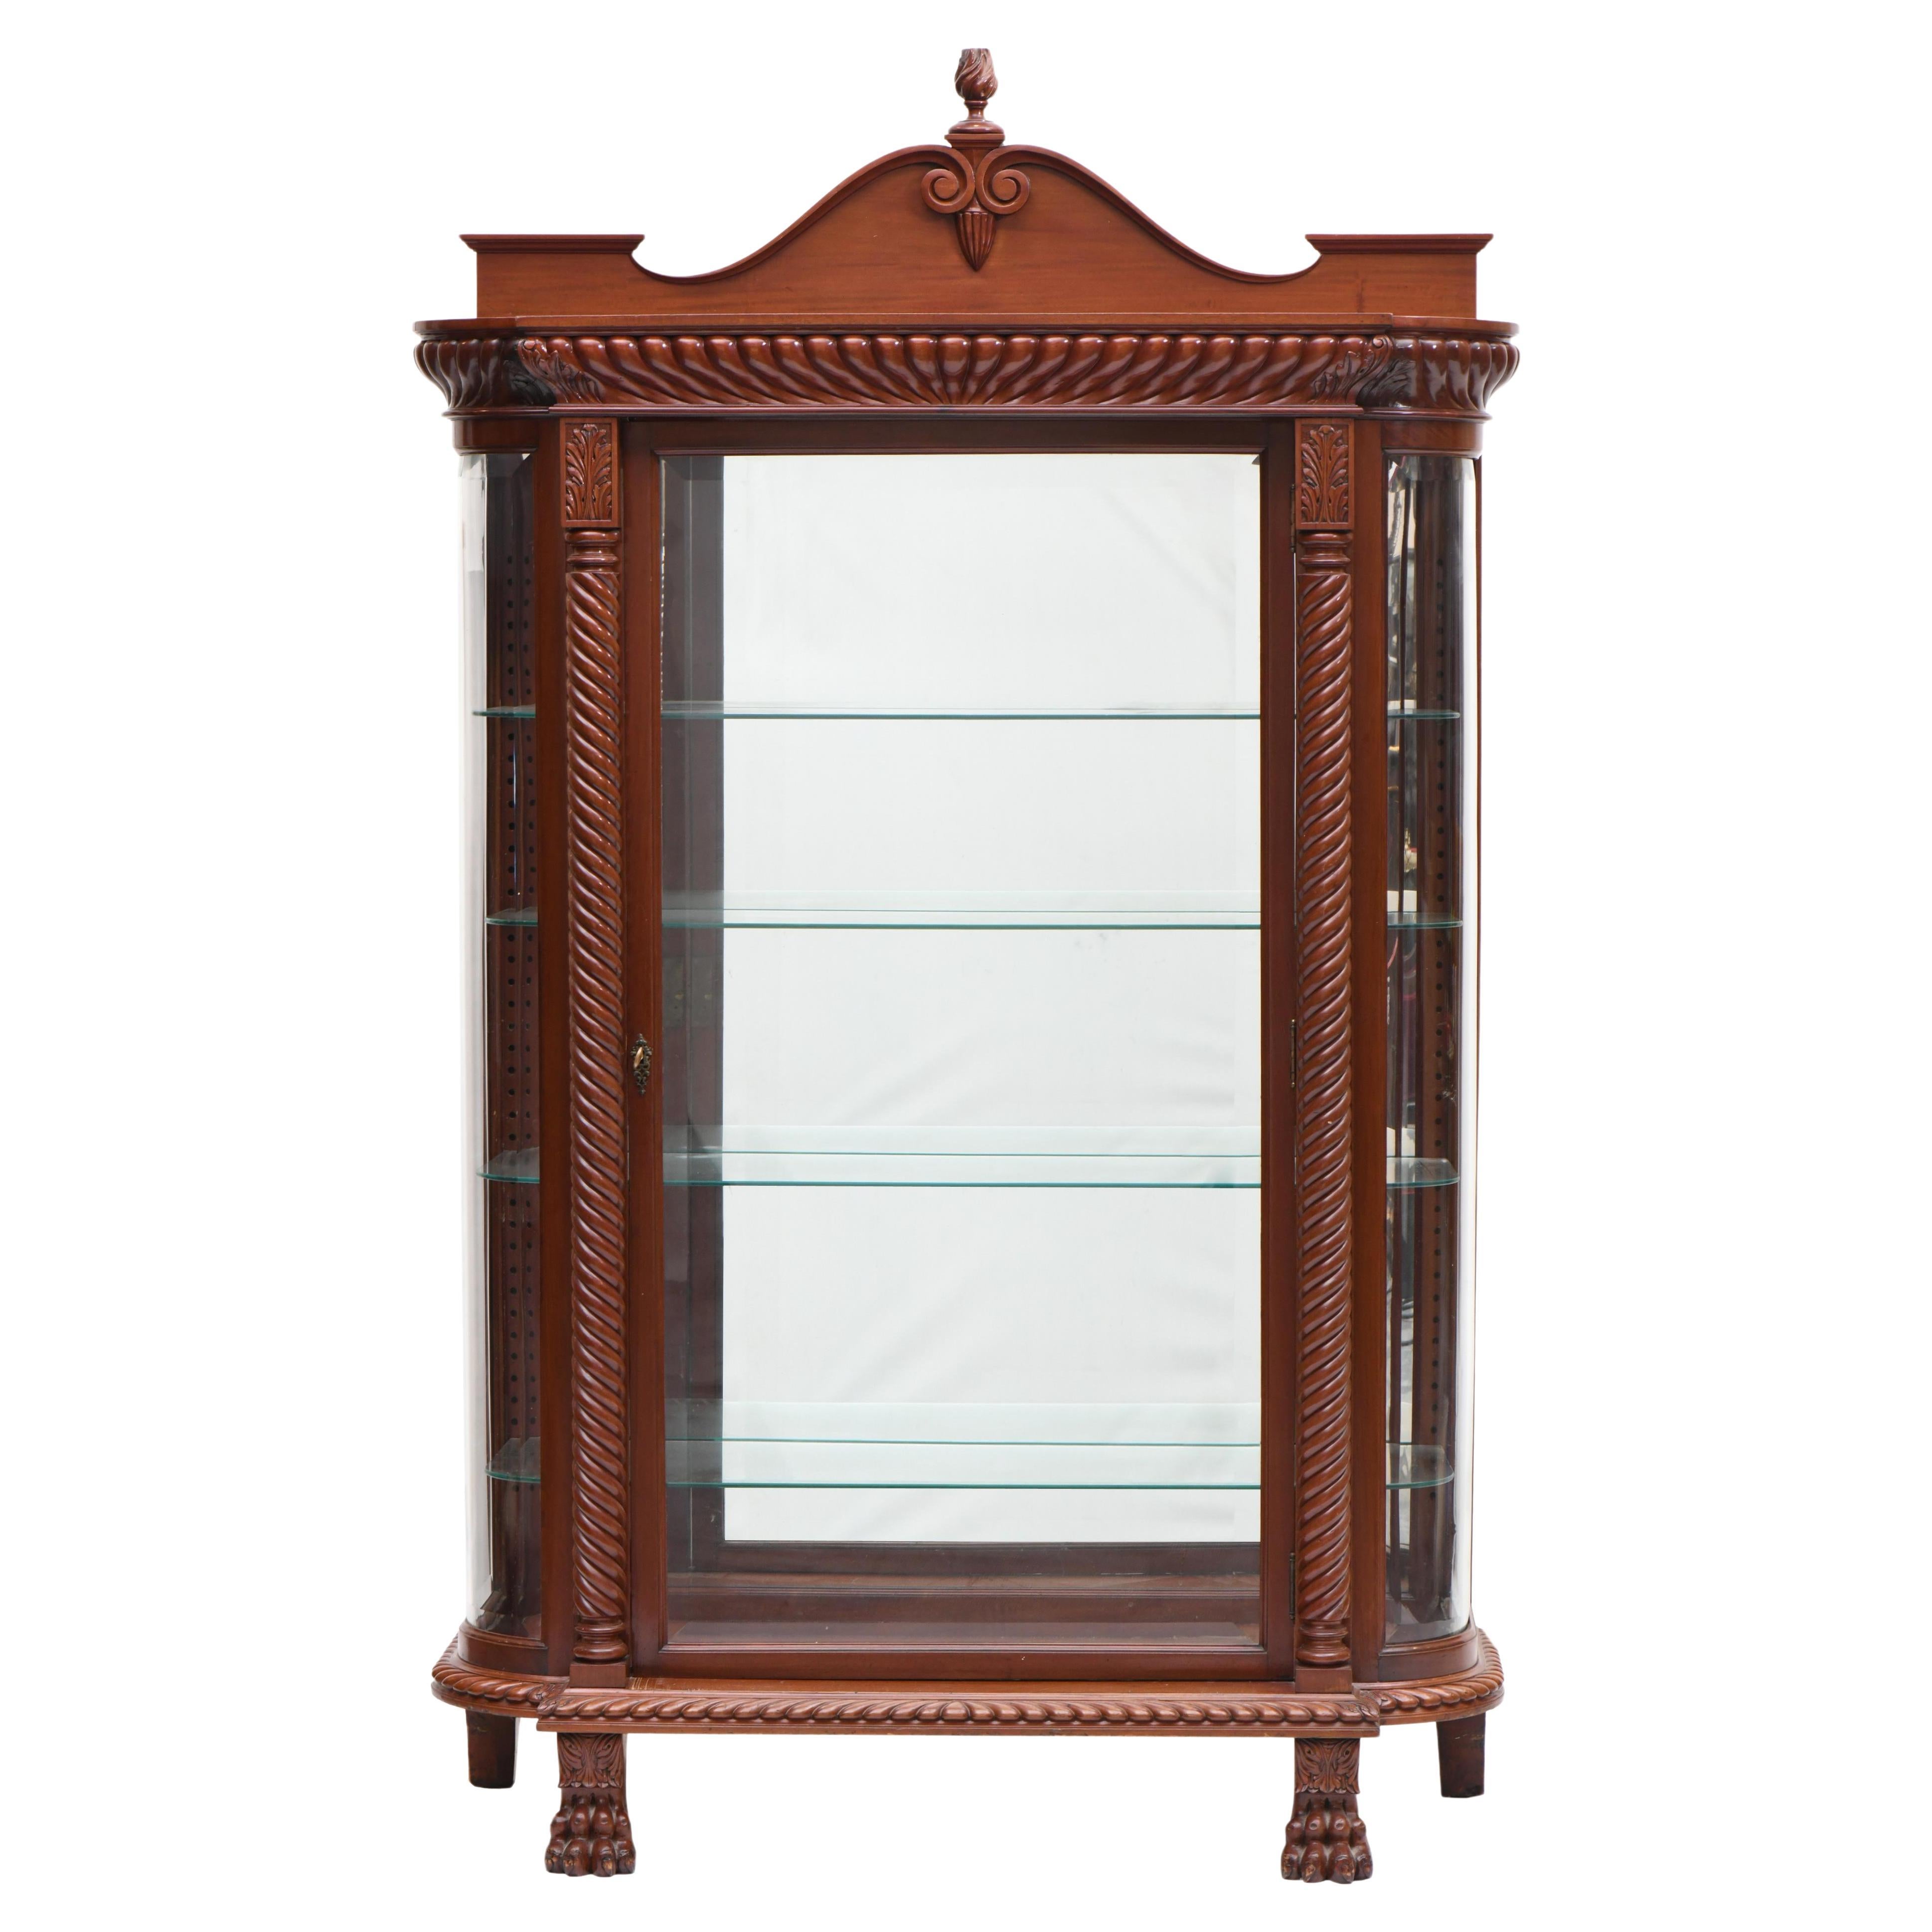 Mahogany Wood Beveled Glass Mirrored Back Cabinet / Vitrine By R.J.Horner For Sale